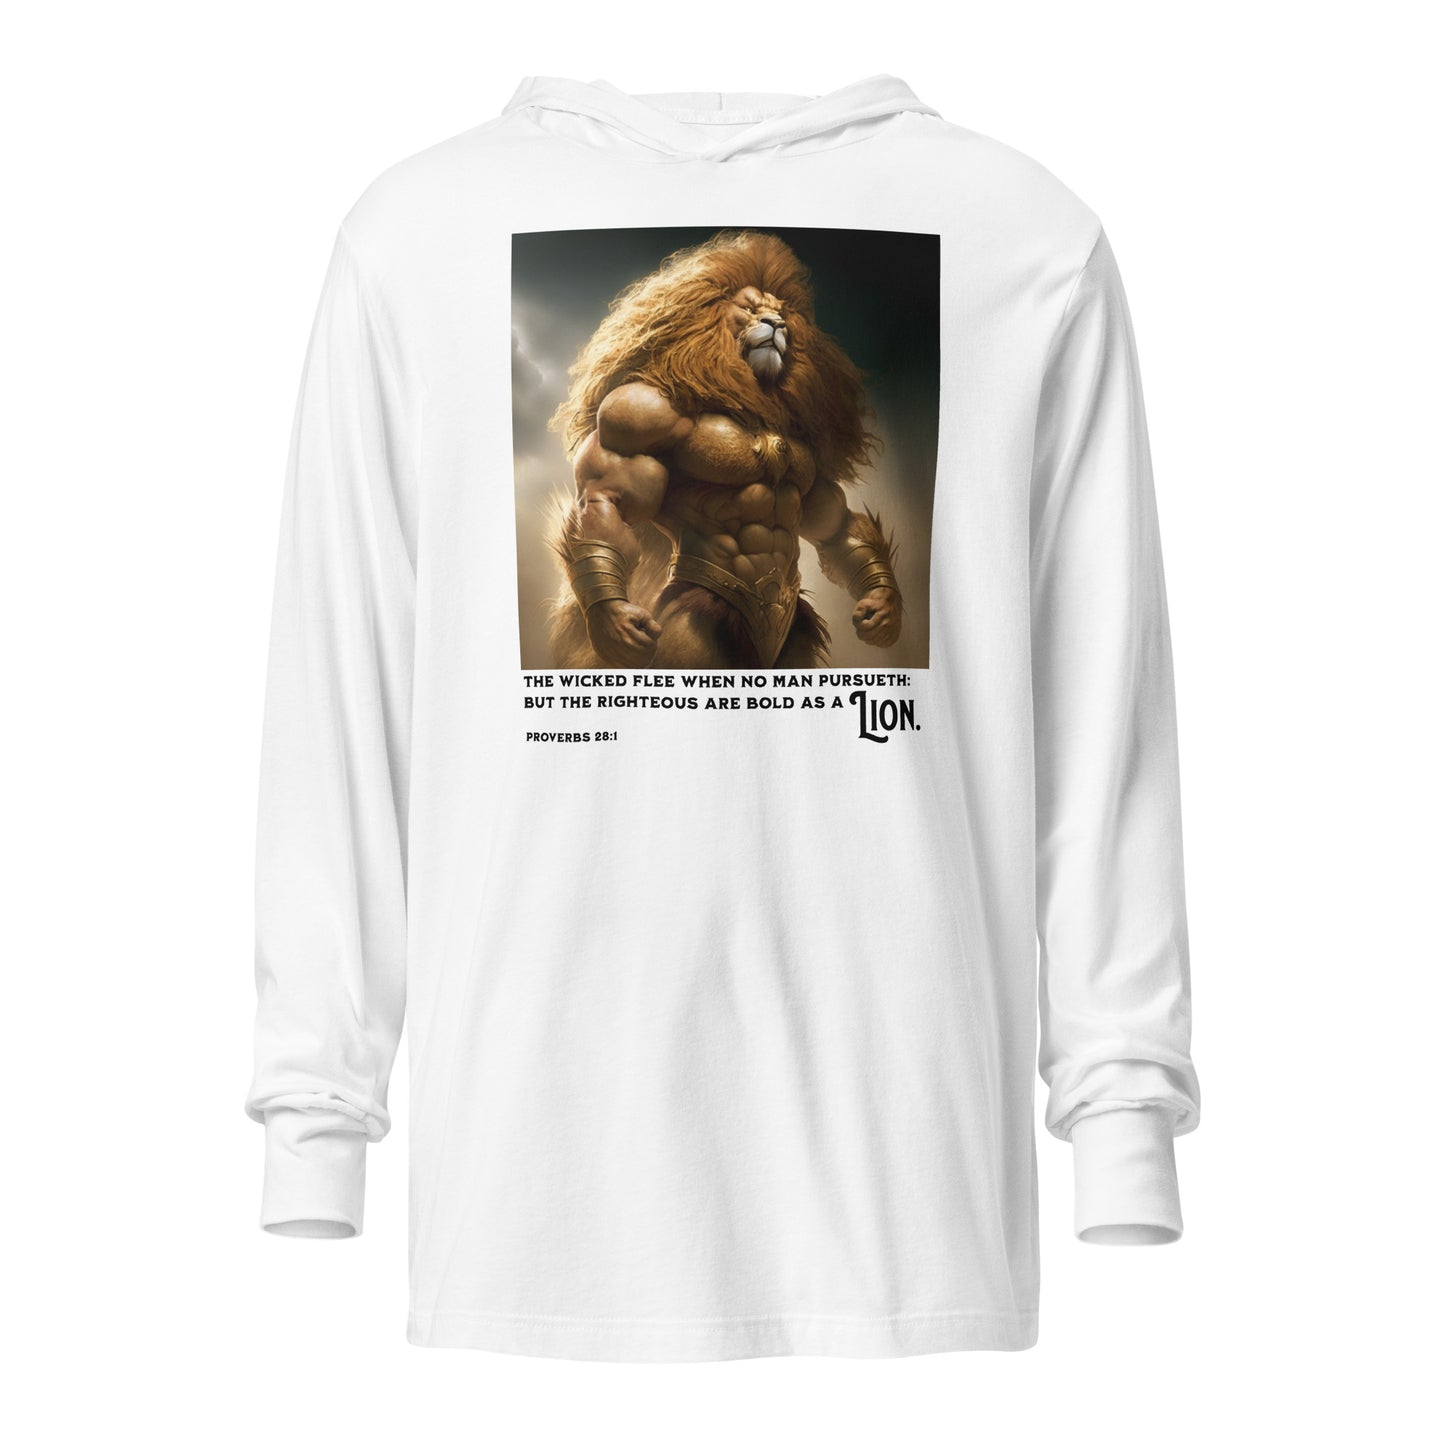 Swole Bold Lion Christian Men's Hooded Long-Sleeve Graphic Tee White